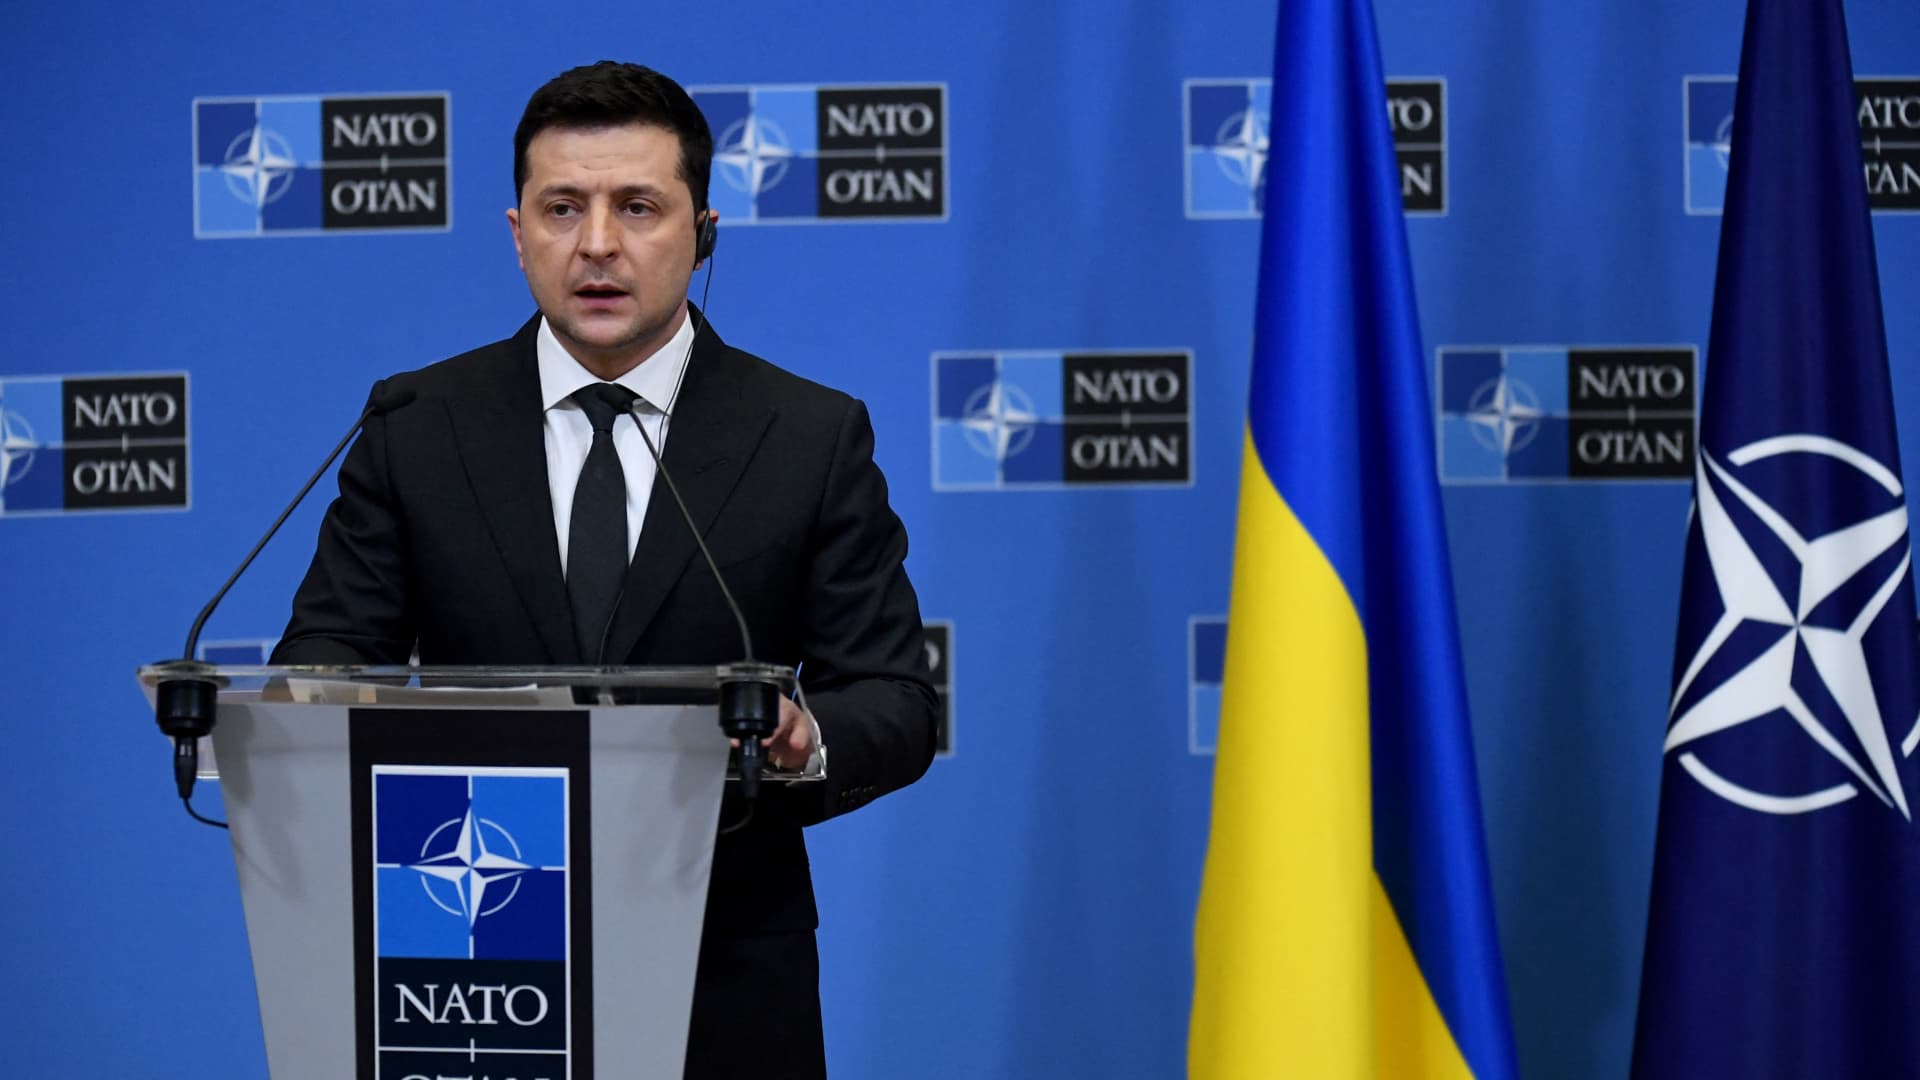 Ukrainian President Volodymyr Zelensky speaks during a press conference after a bilateral meeting at the European Union headquarters in Brussels on December 16, 2021.